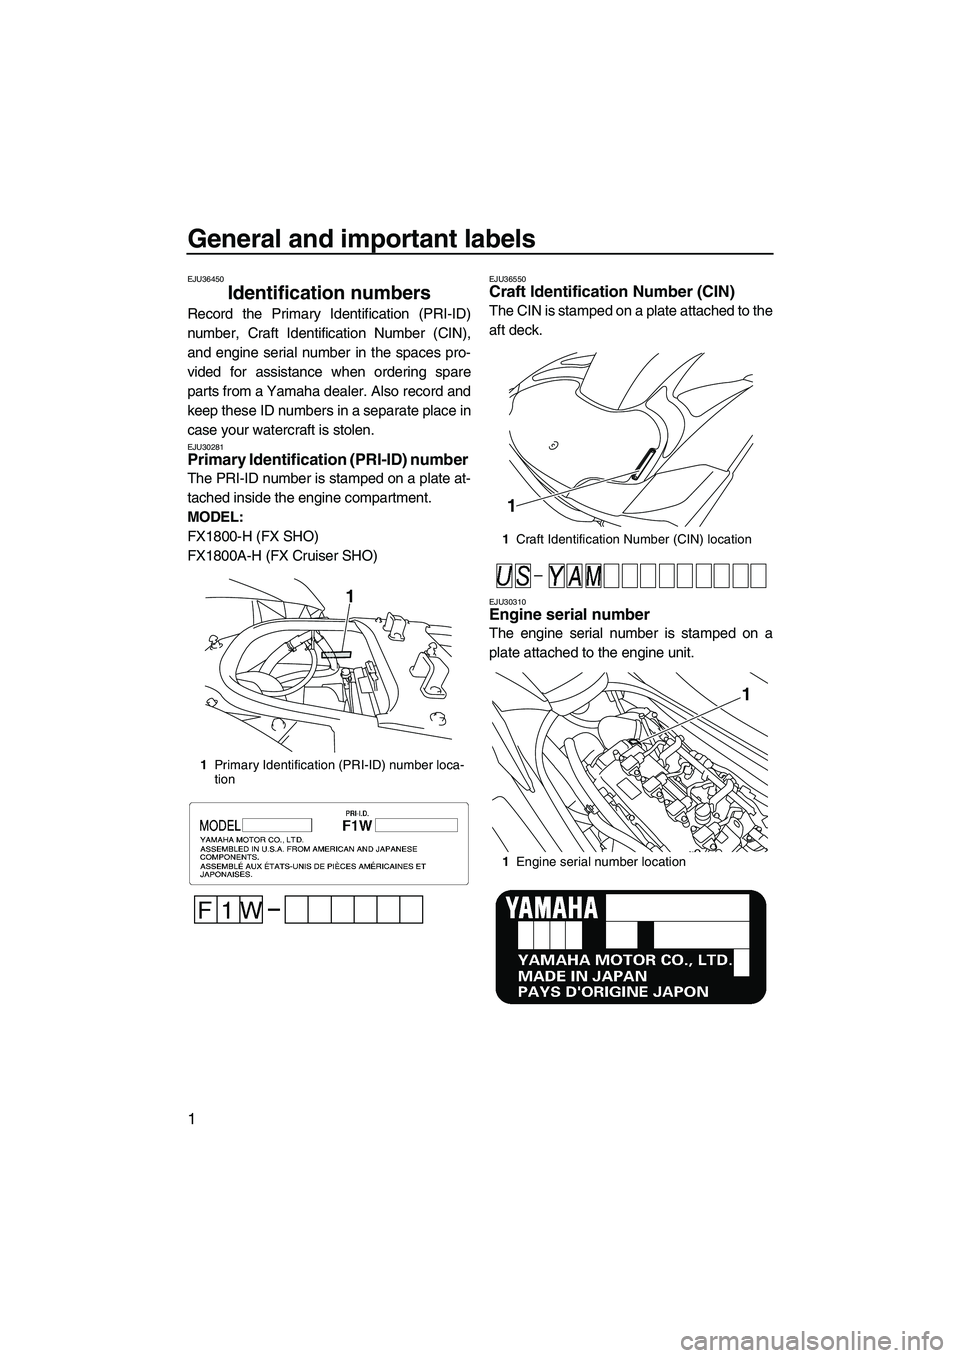 YAMAHA SVHO 2009  Owners Manual General and important labels
1
EJU36450
Identification numbers 
Record the Primary Identification (PRI-ID)
number, Craft Identification Number (CIN),
and engine serial number in the spaces pro-
vided 